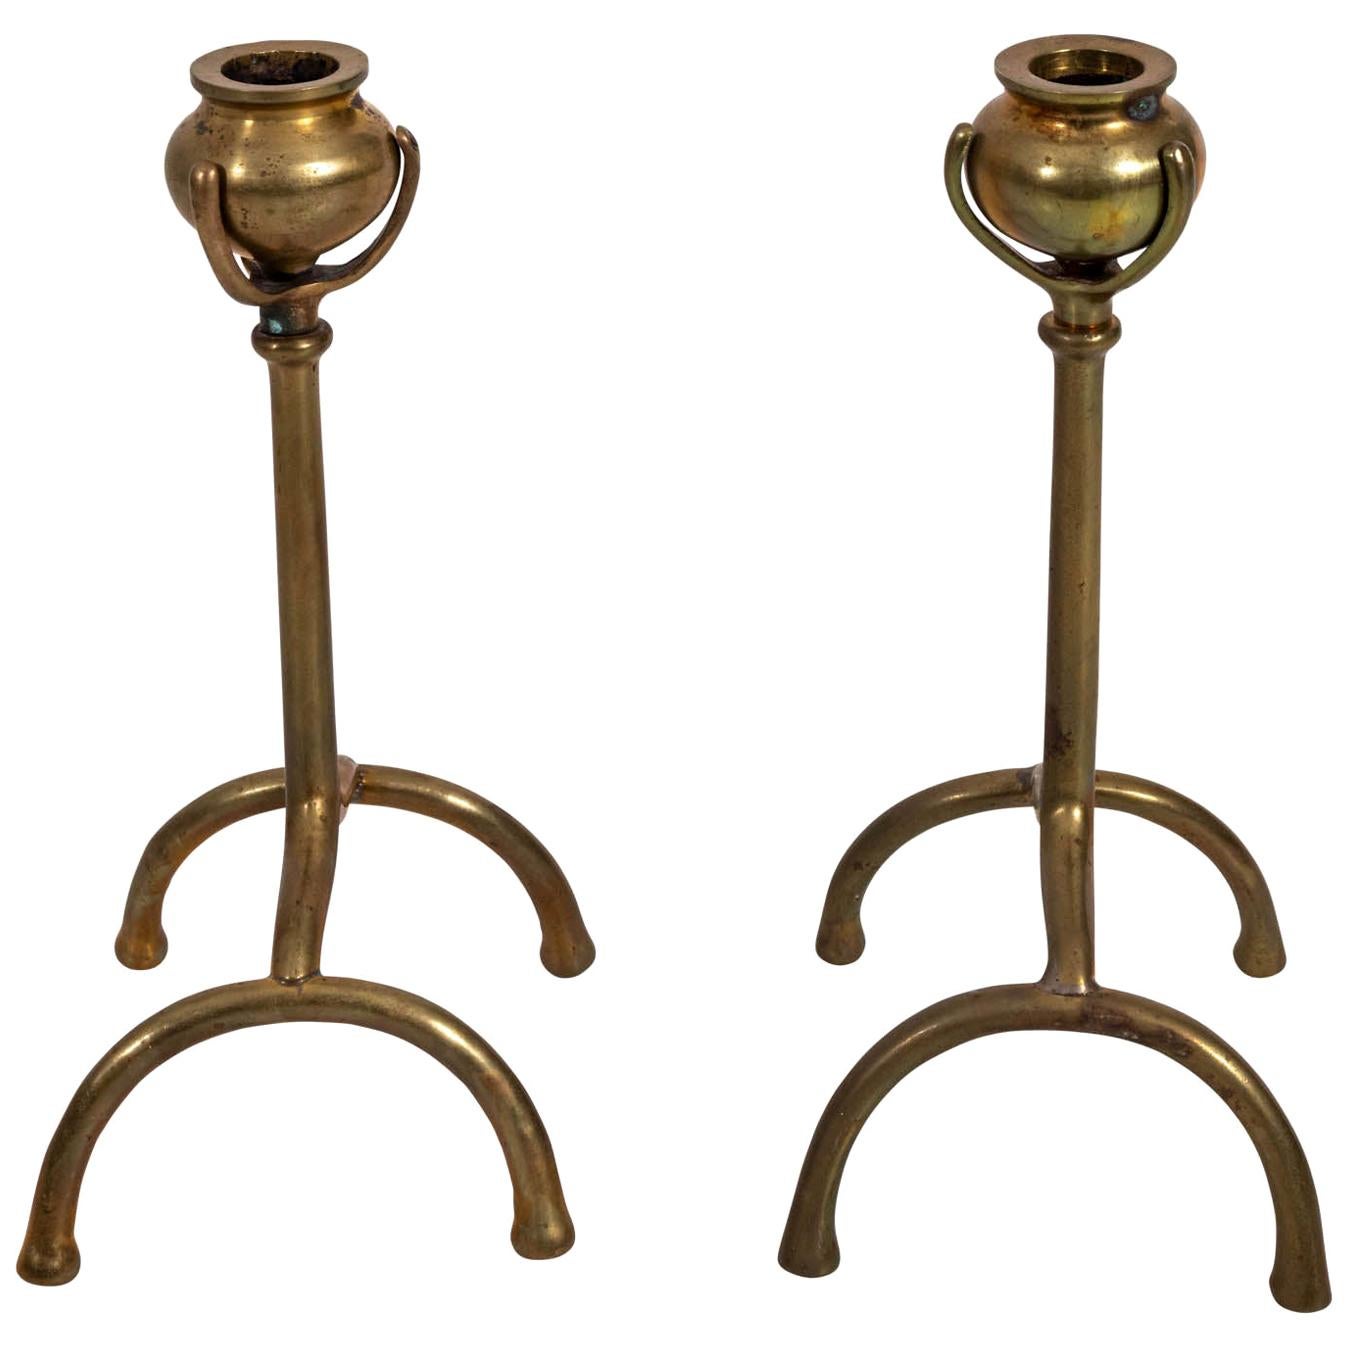 Pair of Tiffany Style Brass Urn Shaped Candlesticks